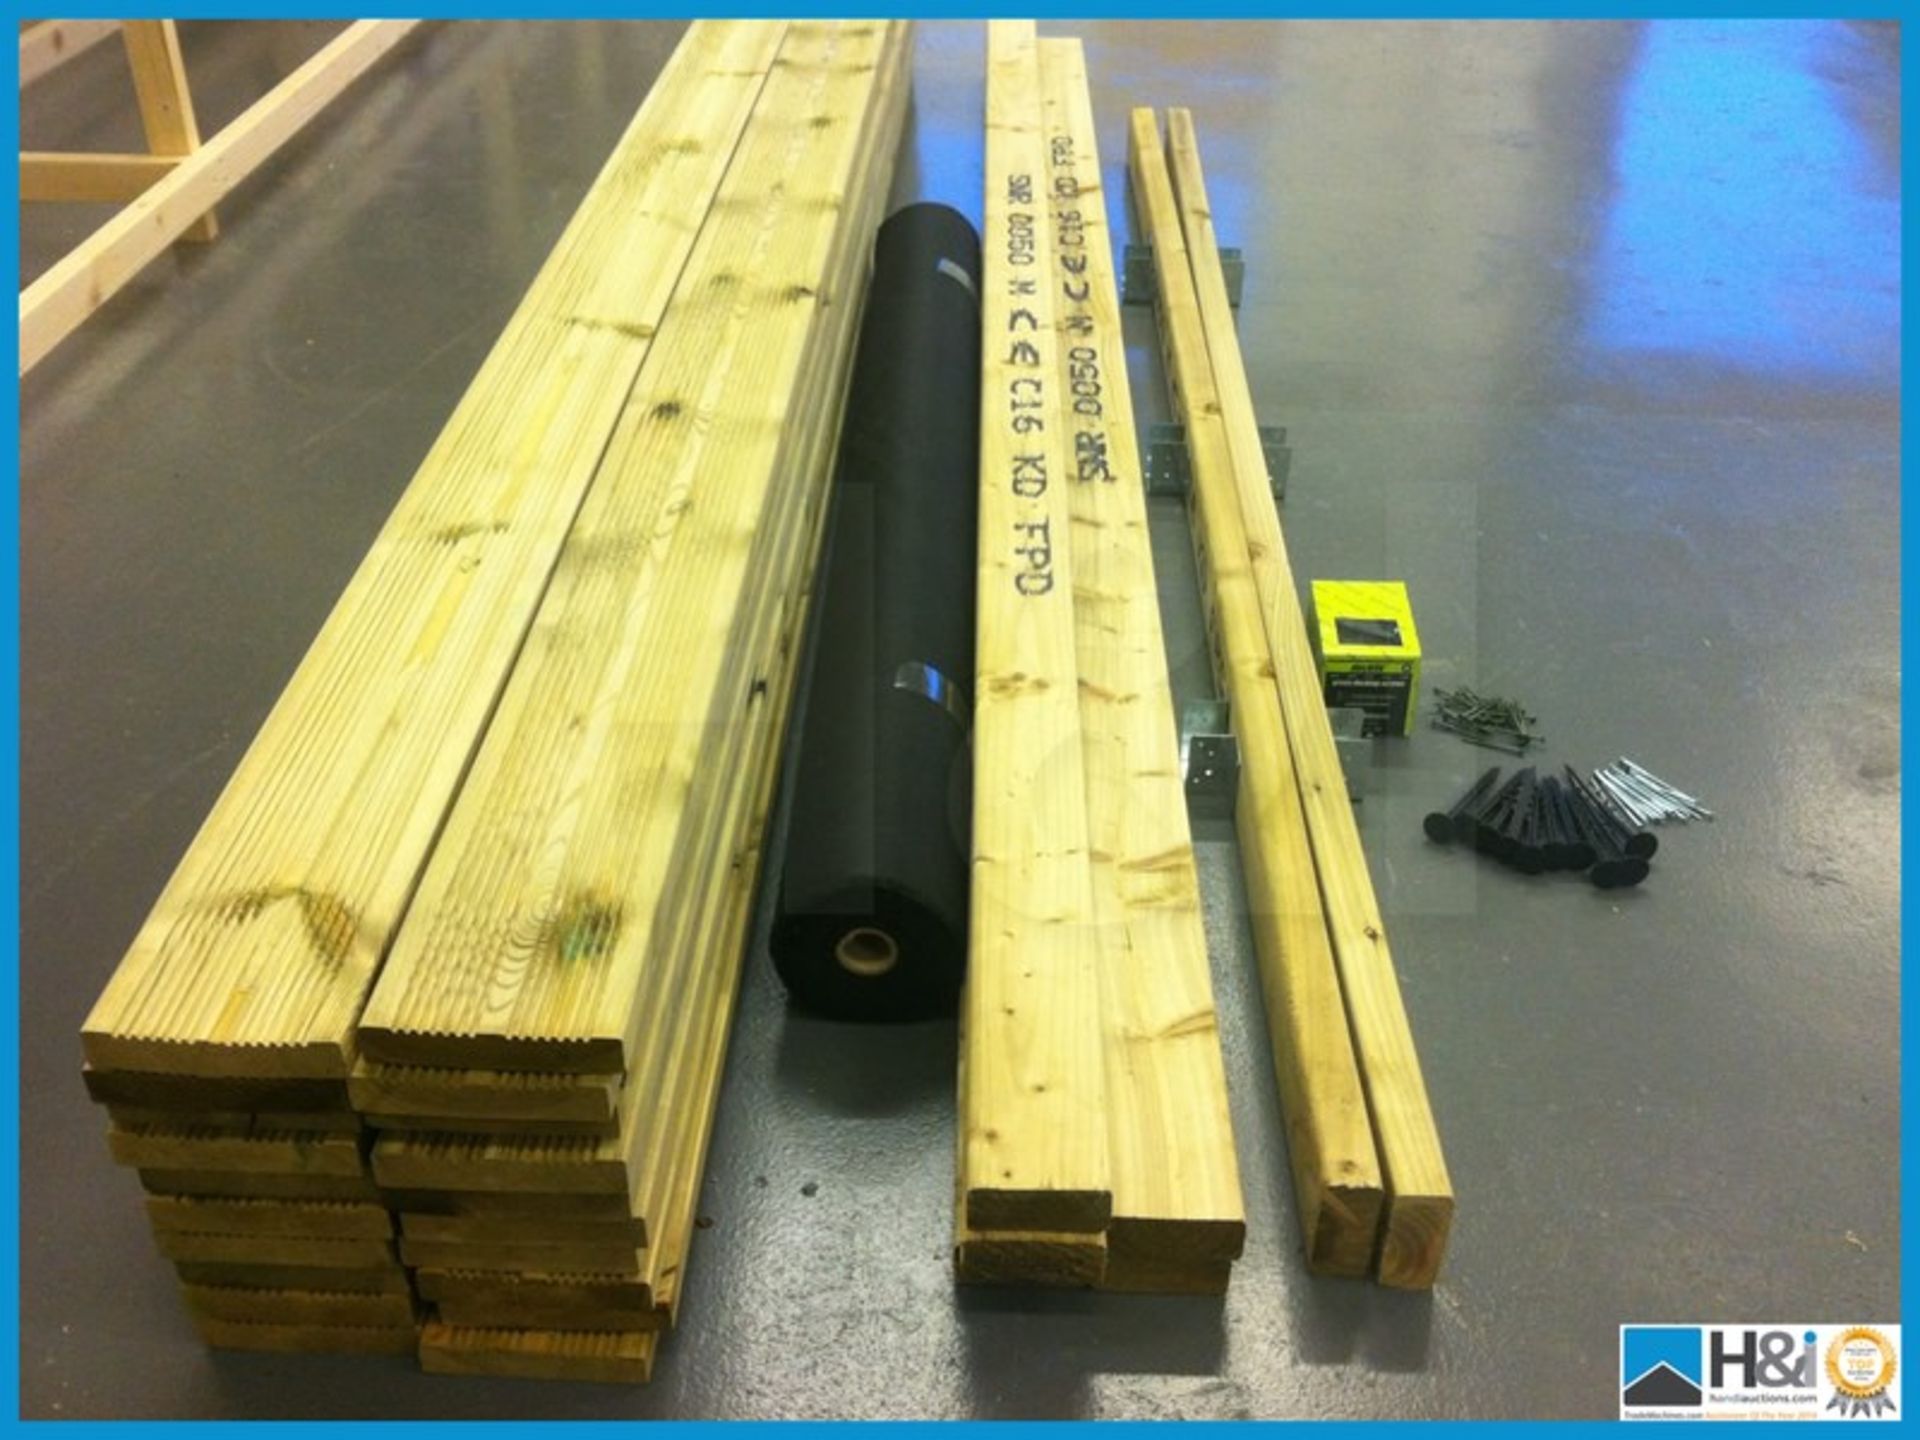 Tanalised 2.4 x 2.4 Heavy Duty Decking Kit. All 32x125 decking cut to length with side fascia's